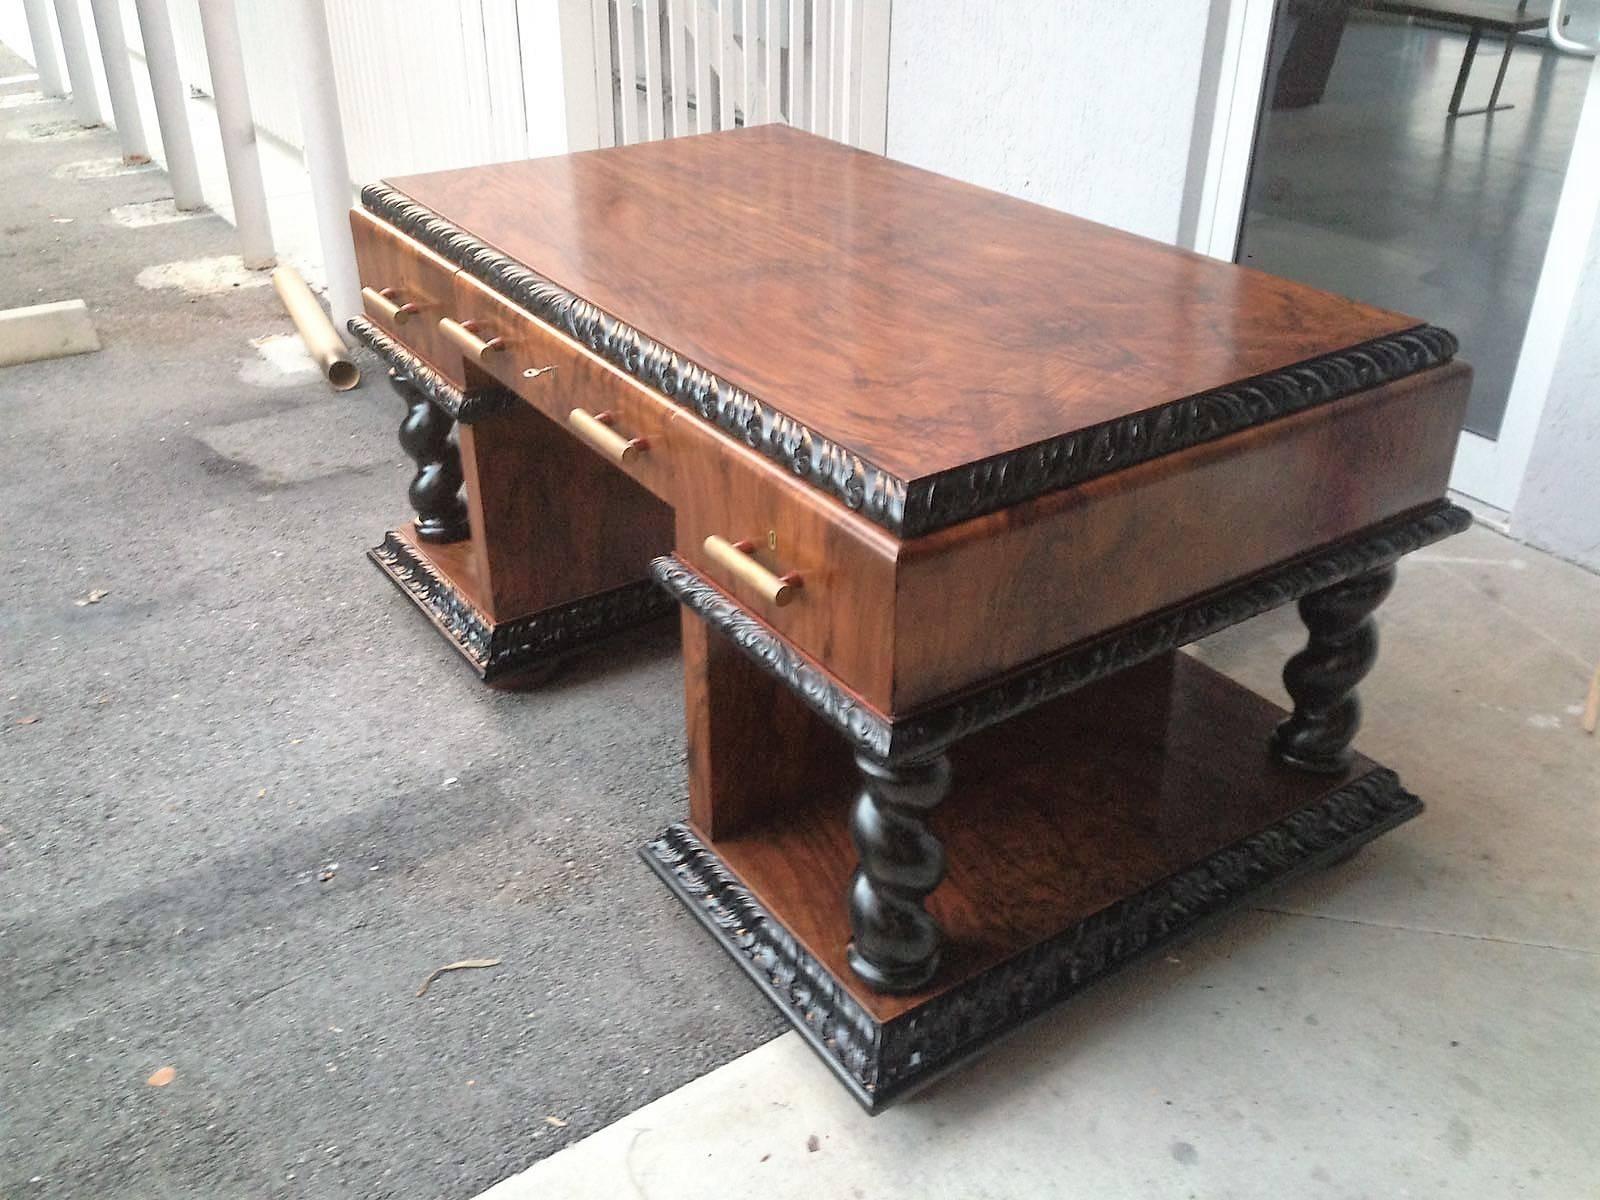 Important Art Deco Desk Table in Walnut with Black Glass Top (Art déco)